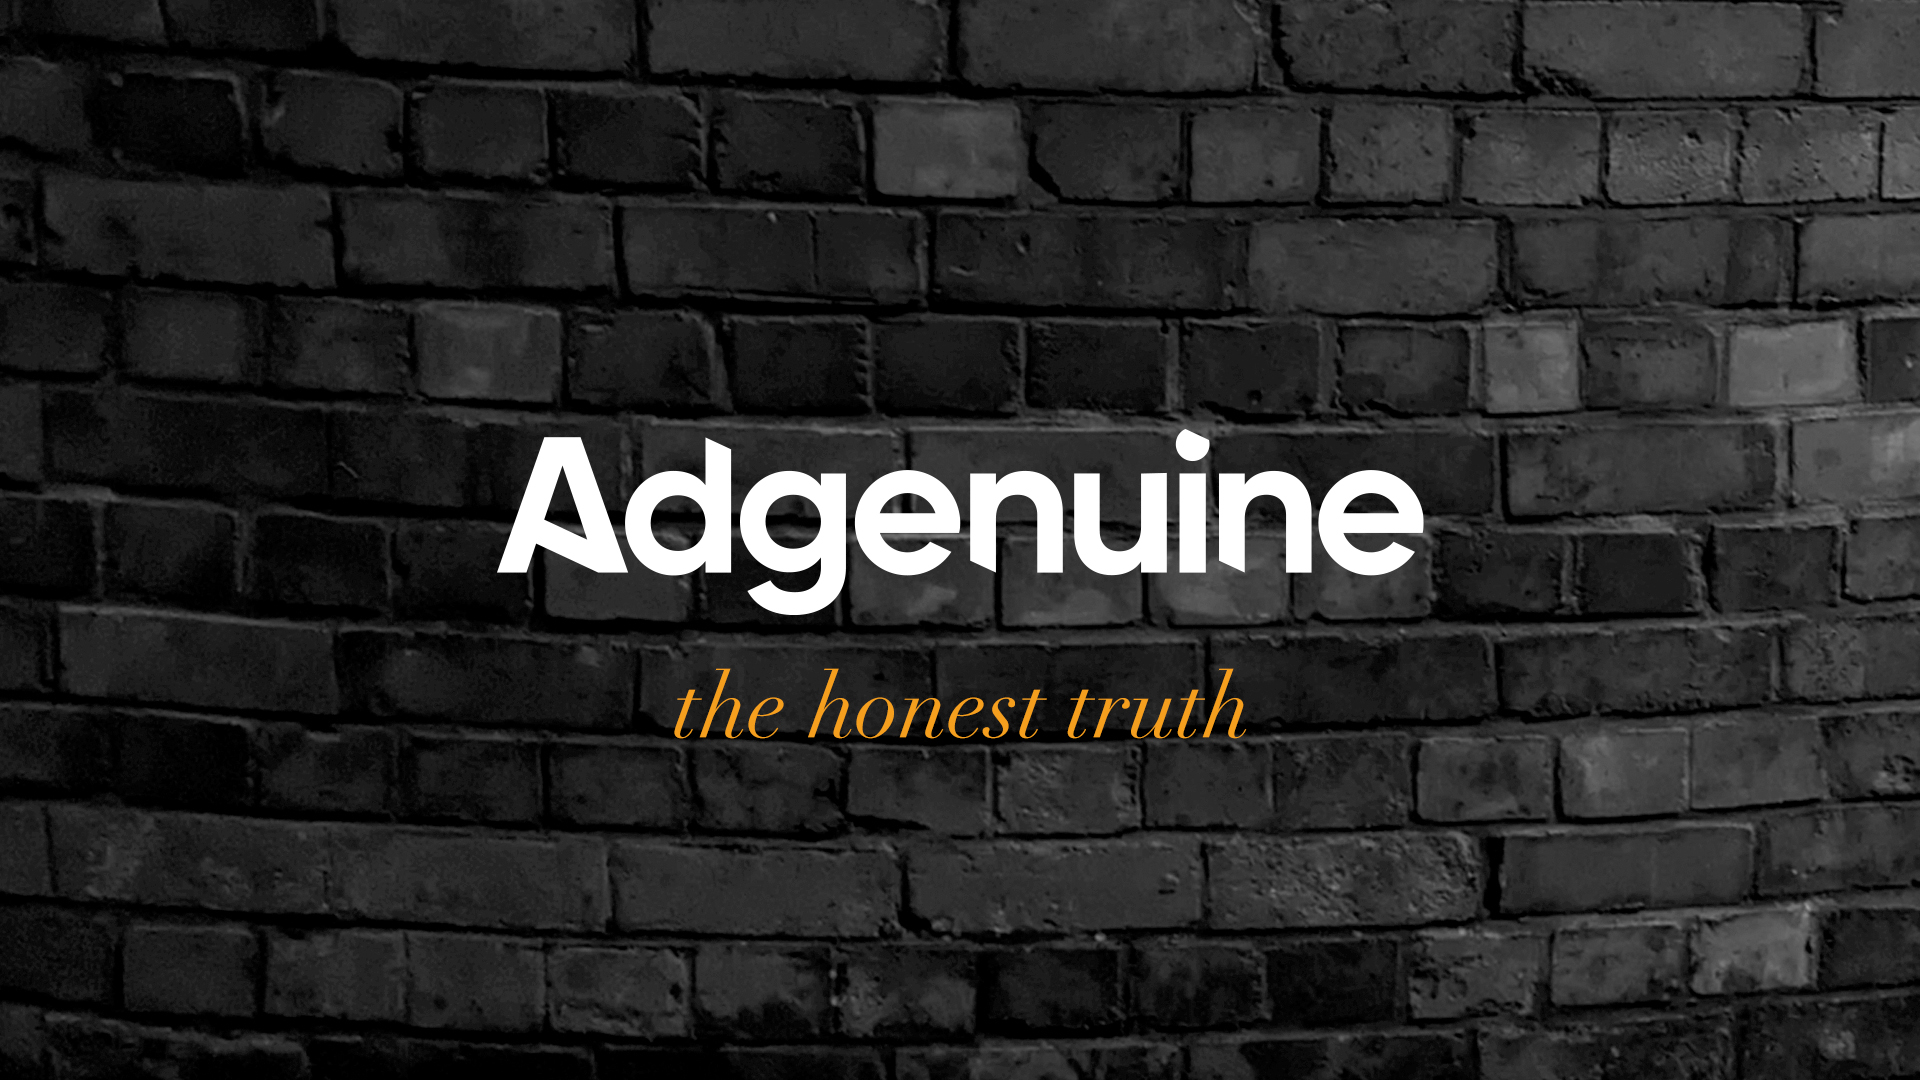 Welcome to Adgenuine- The Honest Truth